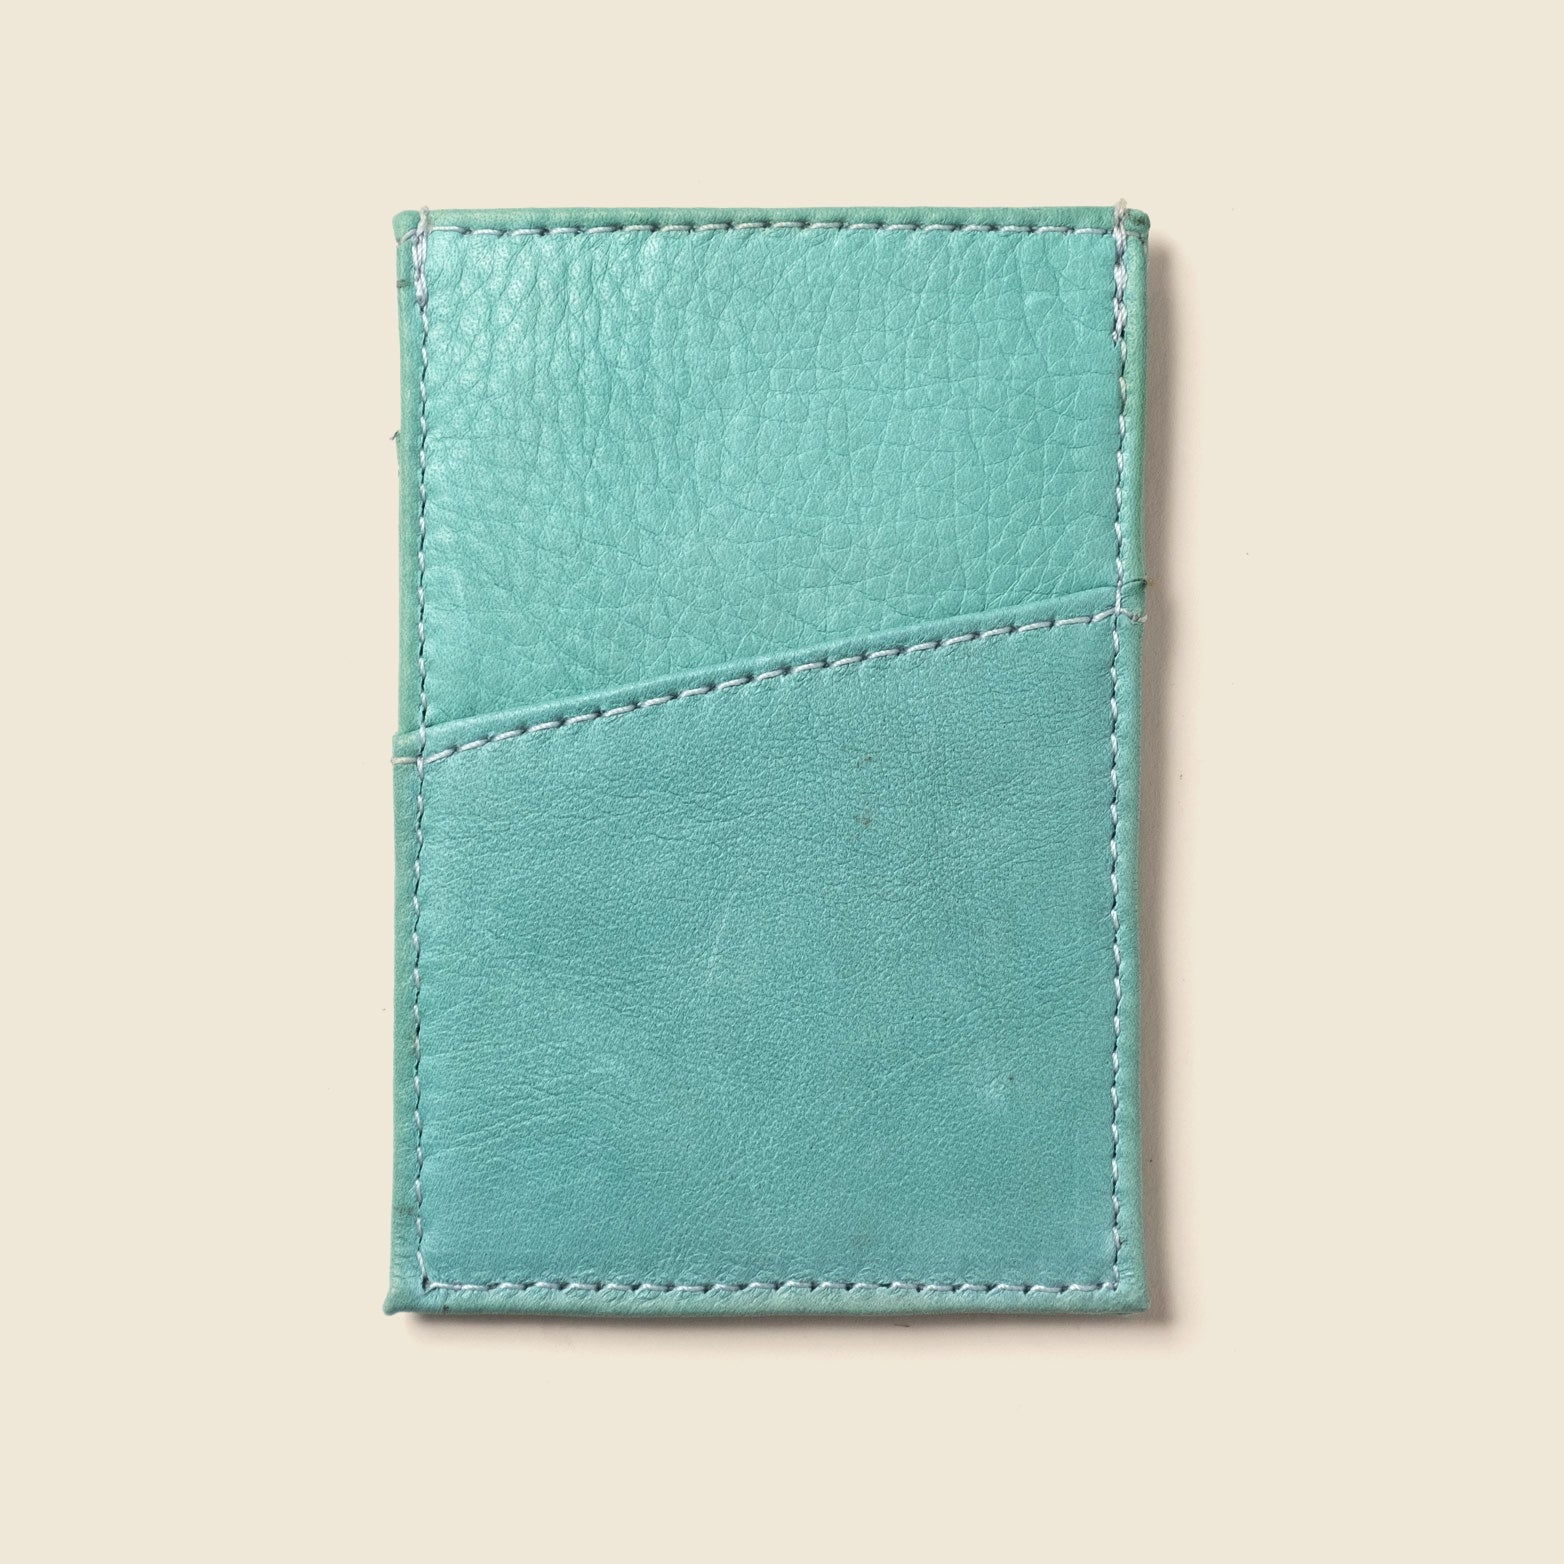 Pastel blue minimalist cardholder for women. Leather wallet with 3 pockets